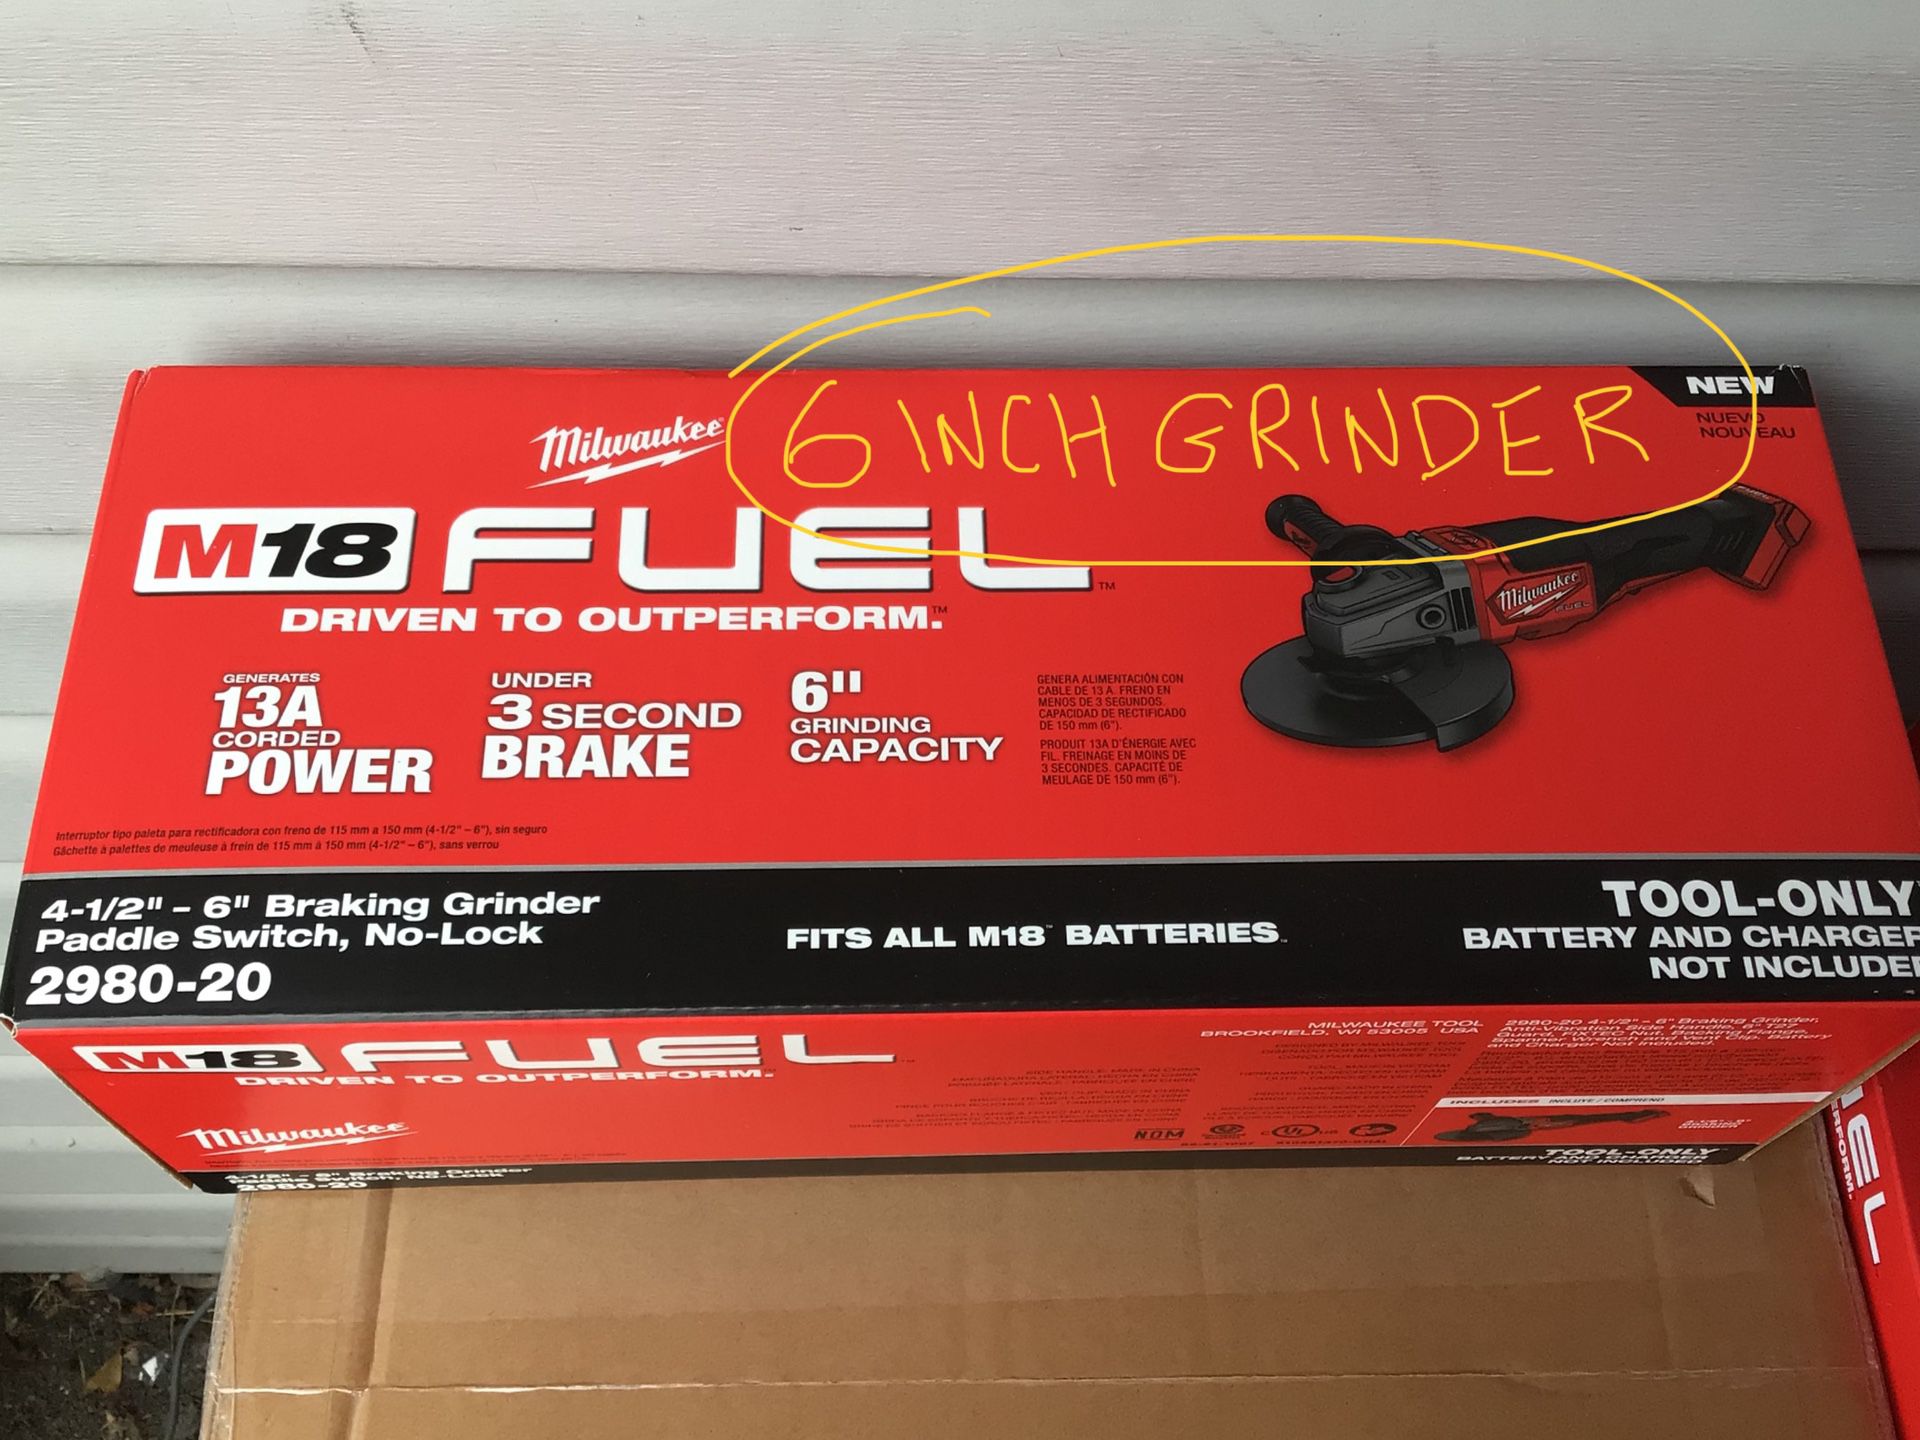 Milwaukee M18 FUEL 6inch Grinder 4-1/2”-6” .  Brand NEW.  Tool Only.